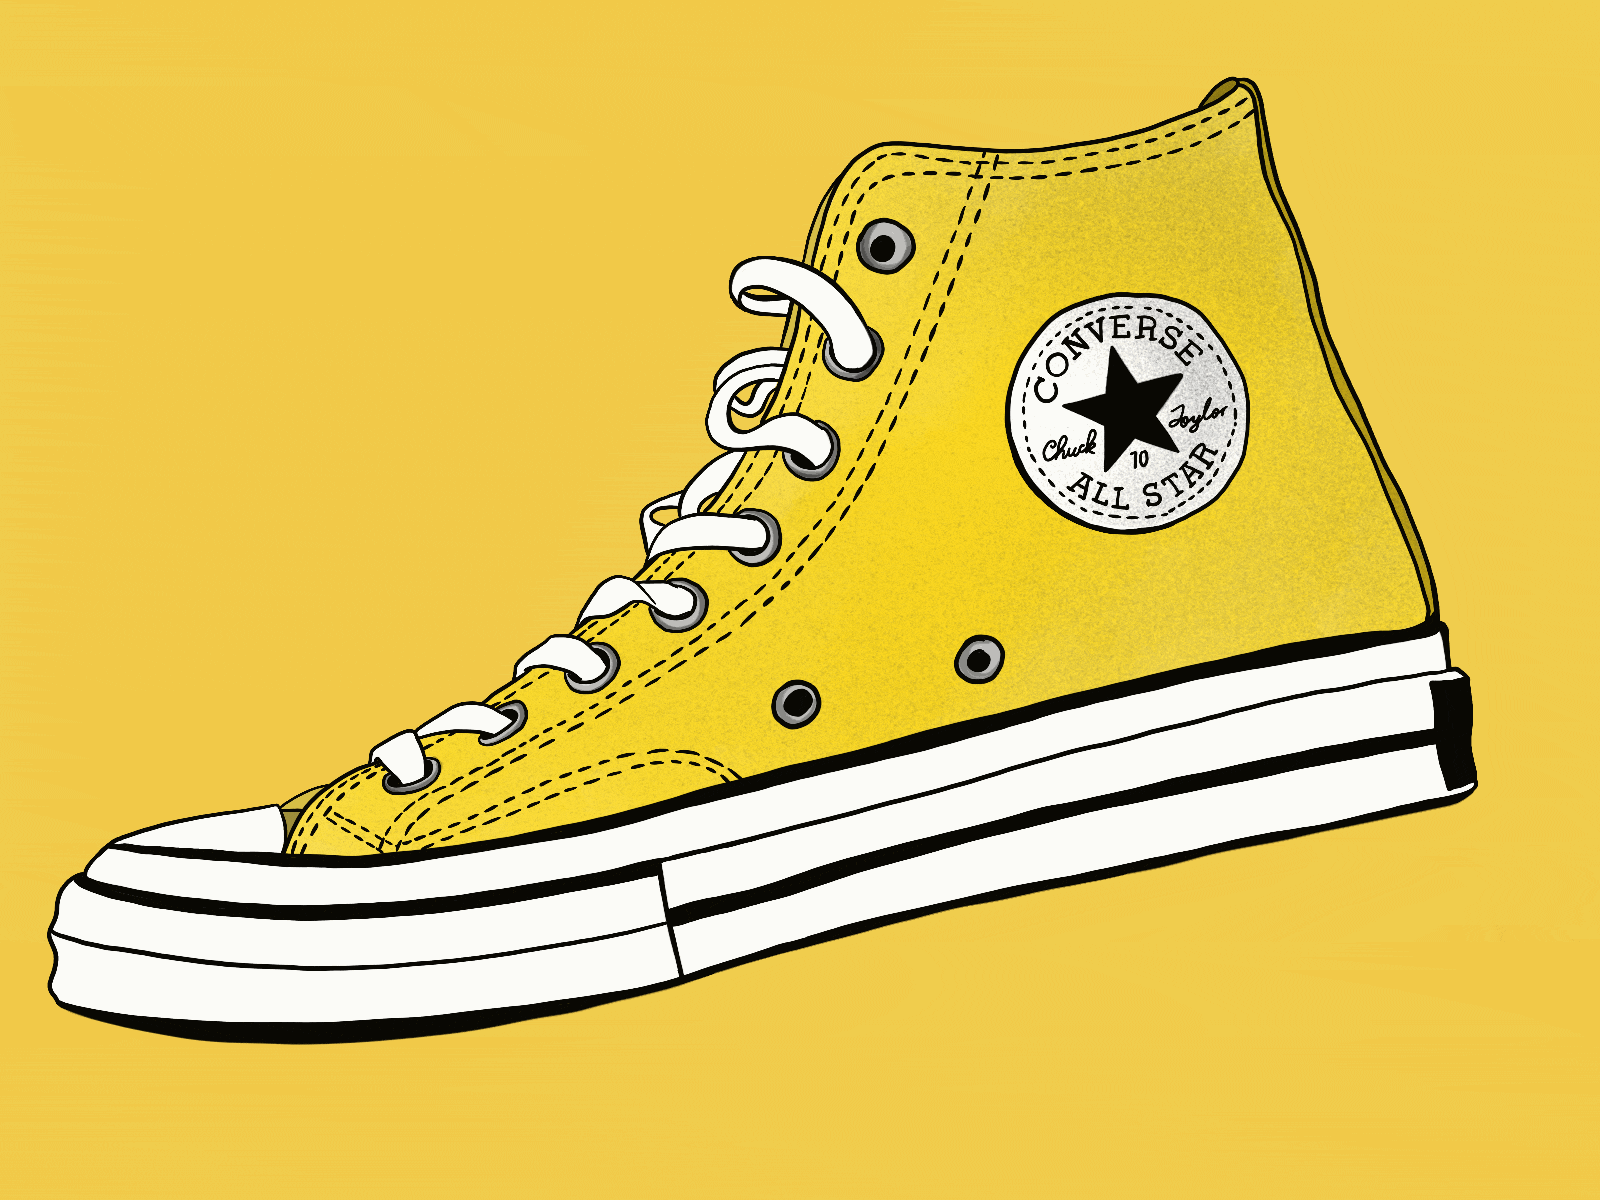 Converse + Snake all star animation animation 2d converse illustration motion graphics procreate snake